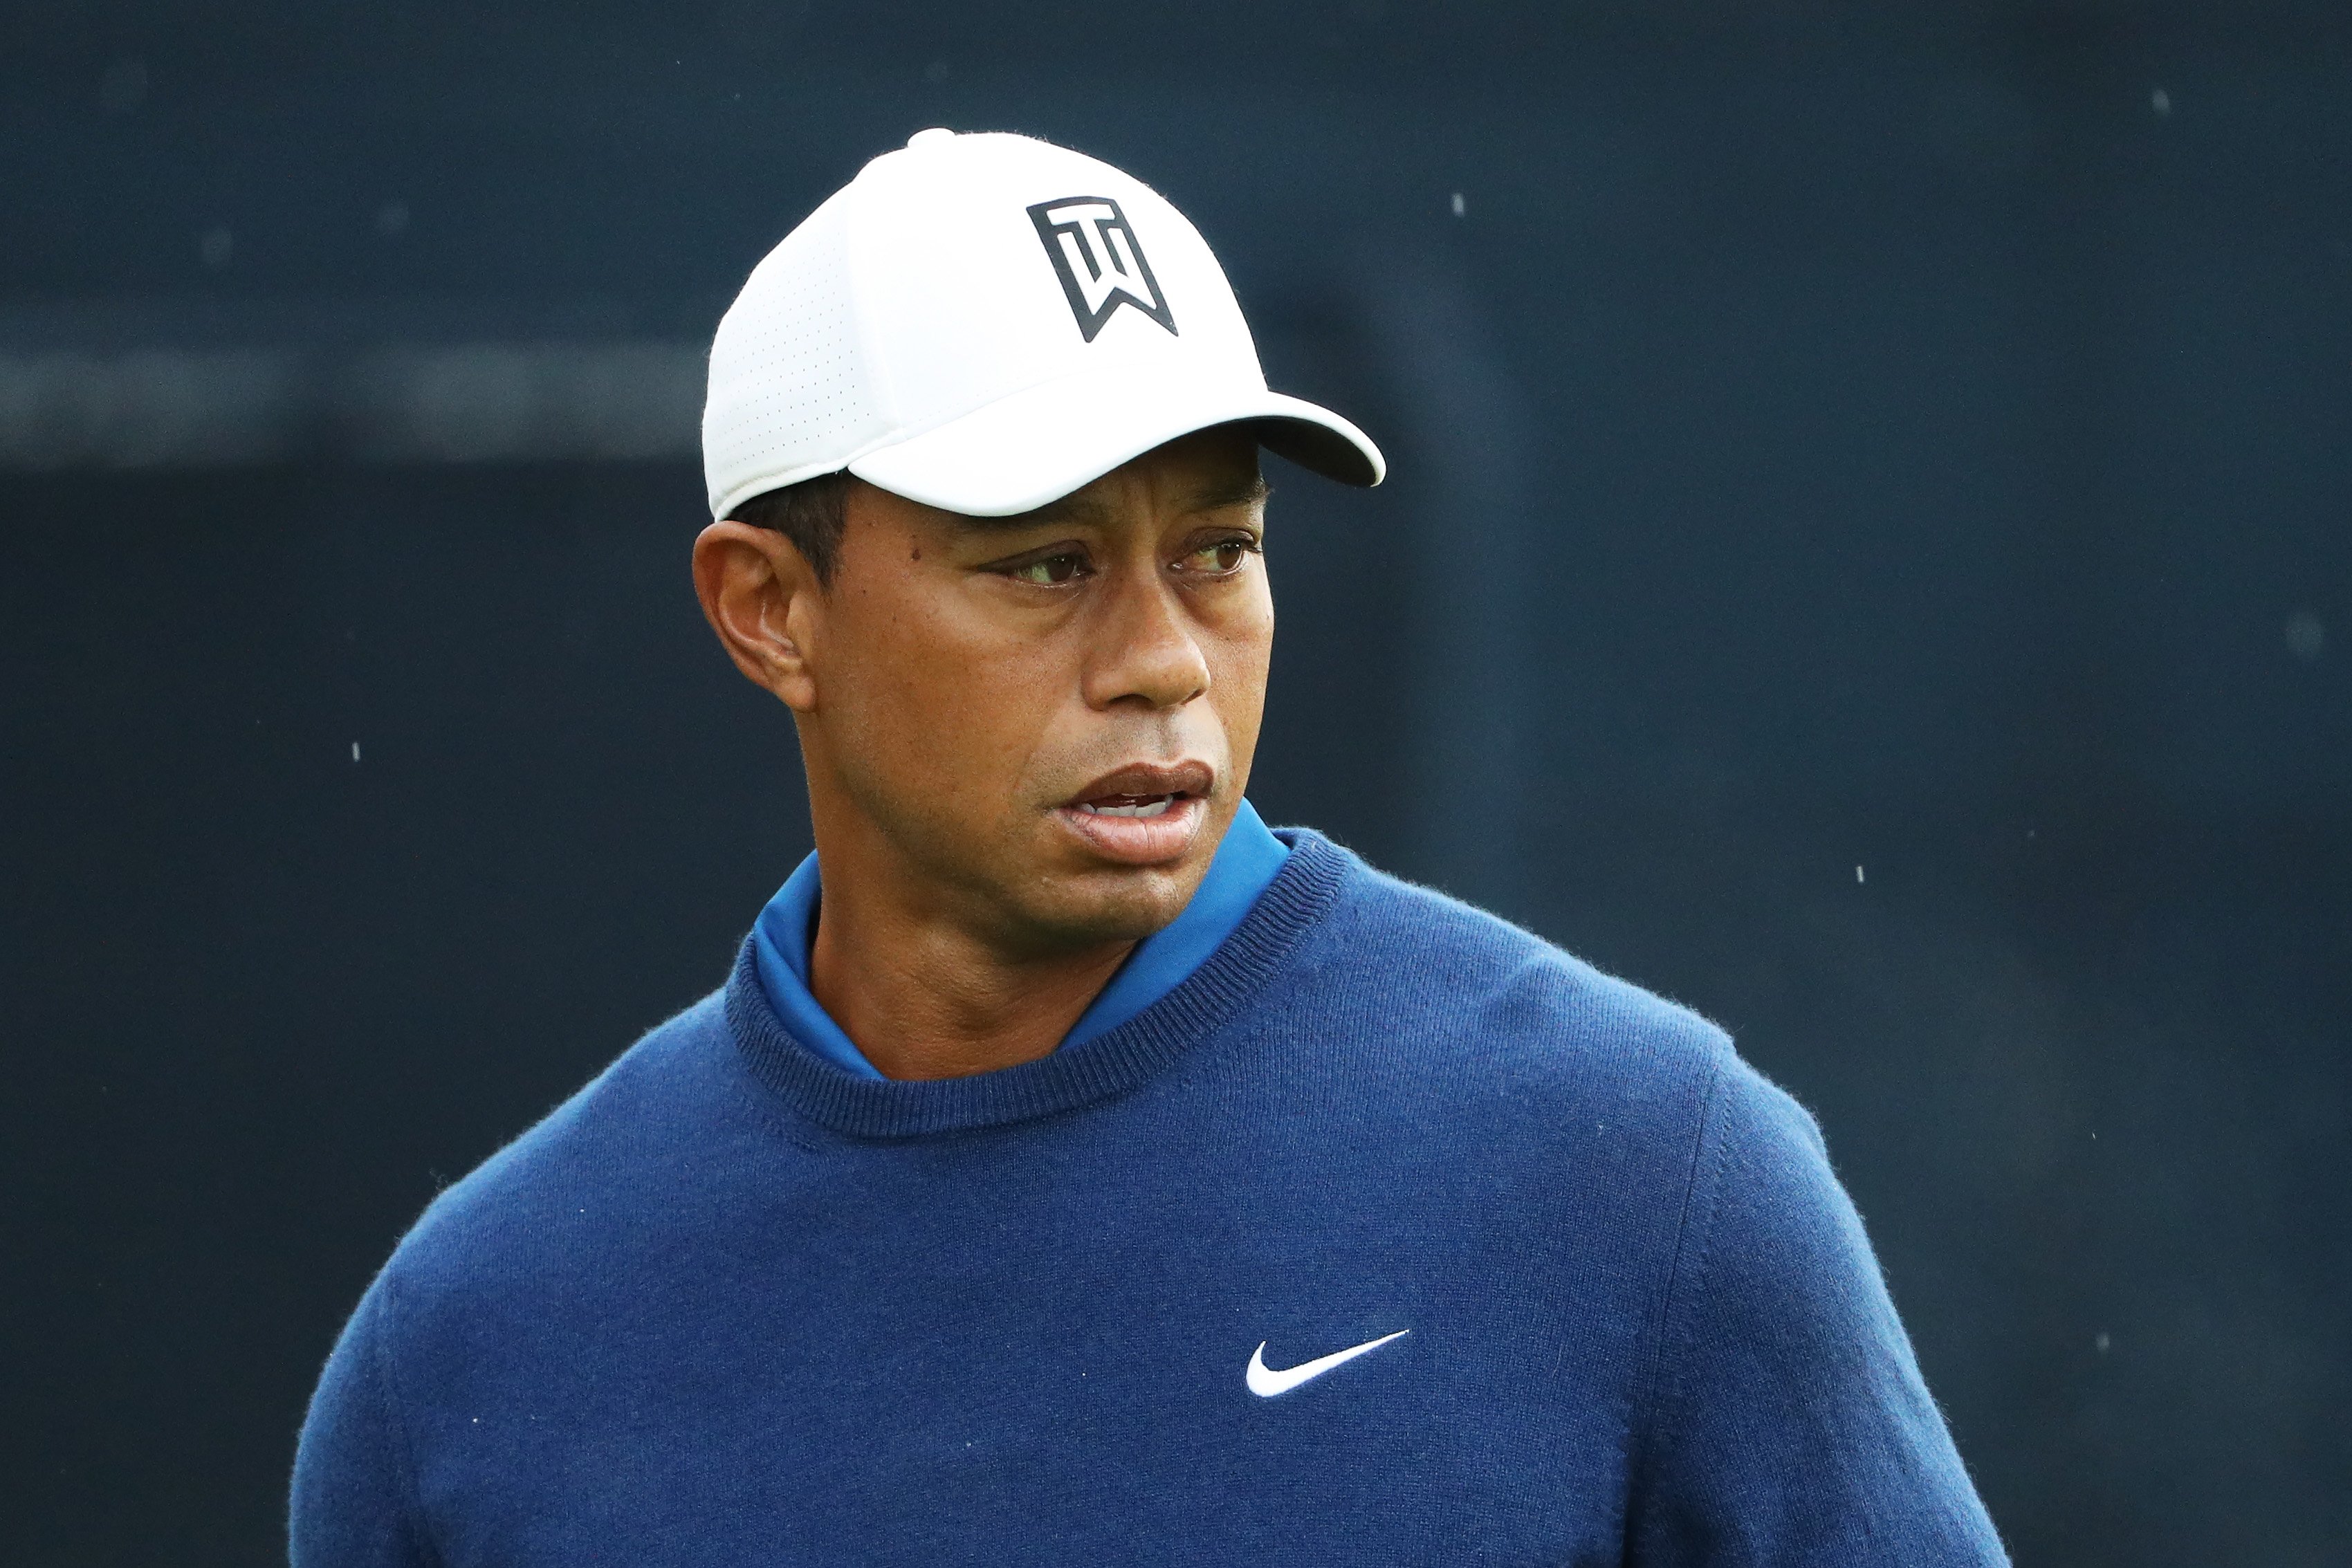 Tiger Woods of the United States warms up on the practice range during the first round of the 2019 PGA Championship at the Bethpage Black course | Photo: Getty Images